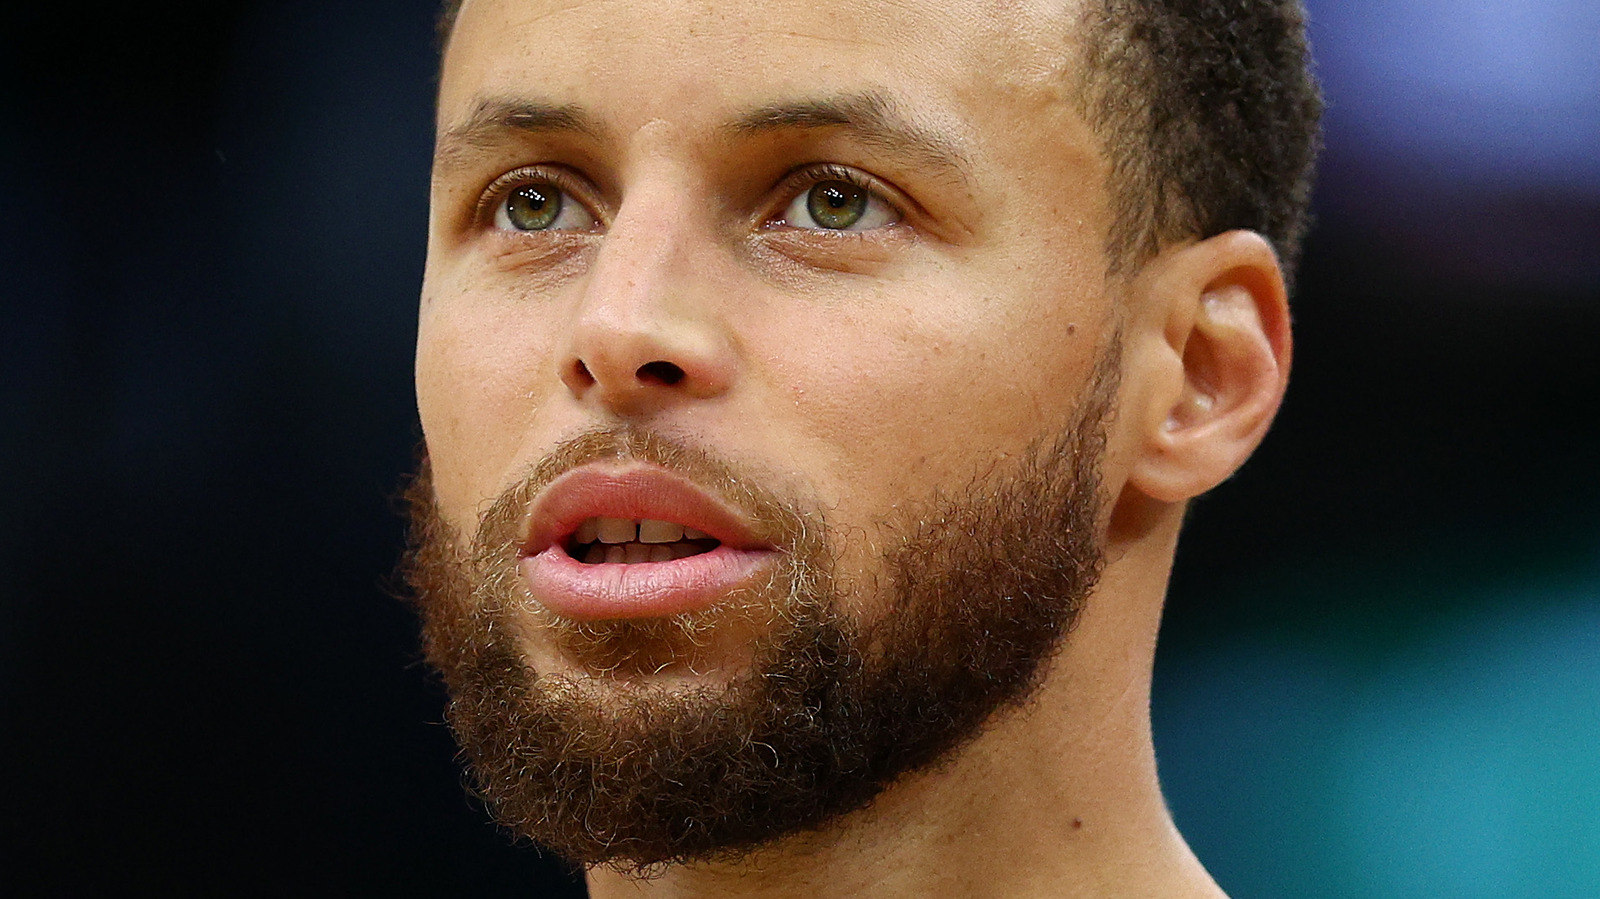 Dell Curry reveals what he talks to his sons Steph and Seth about